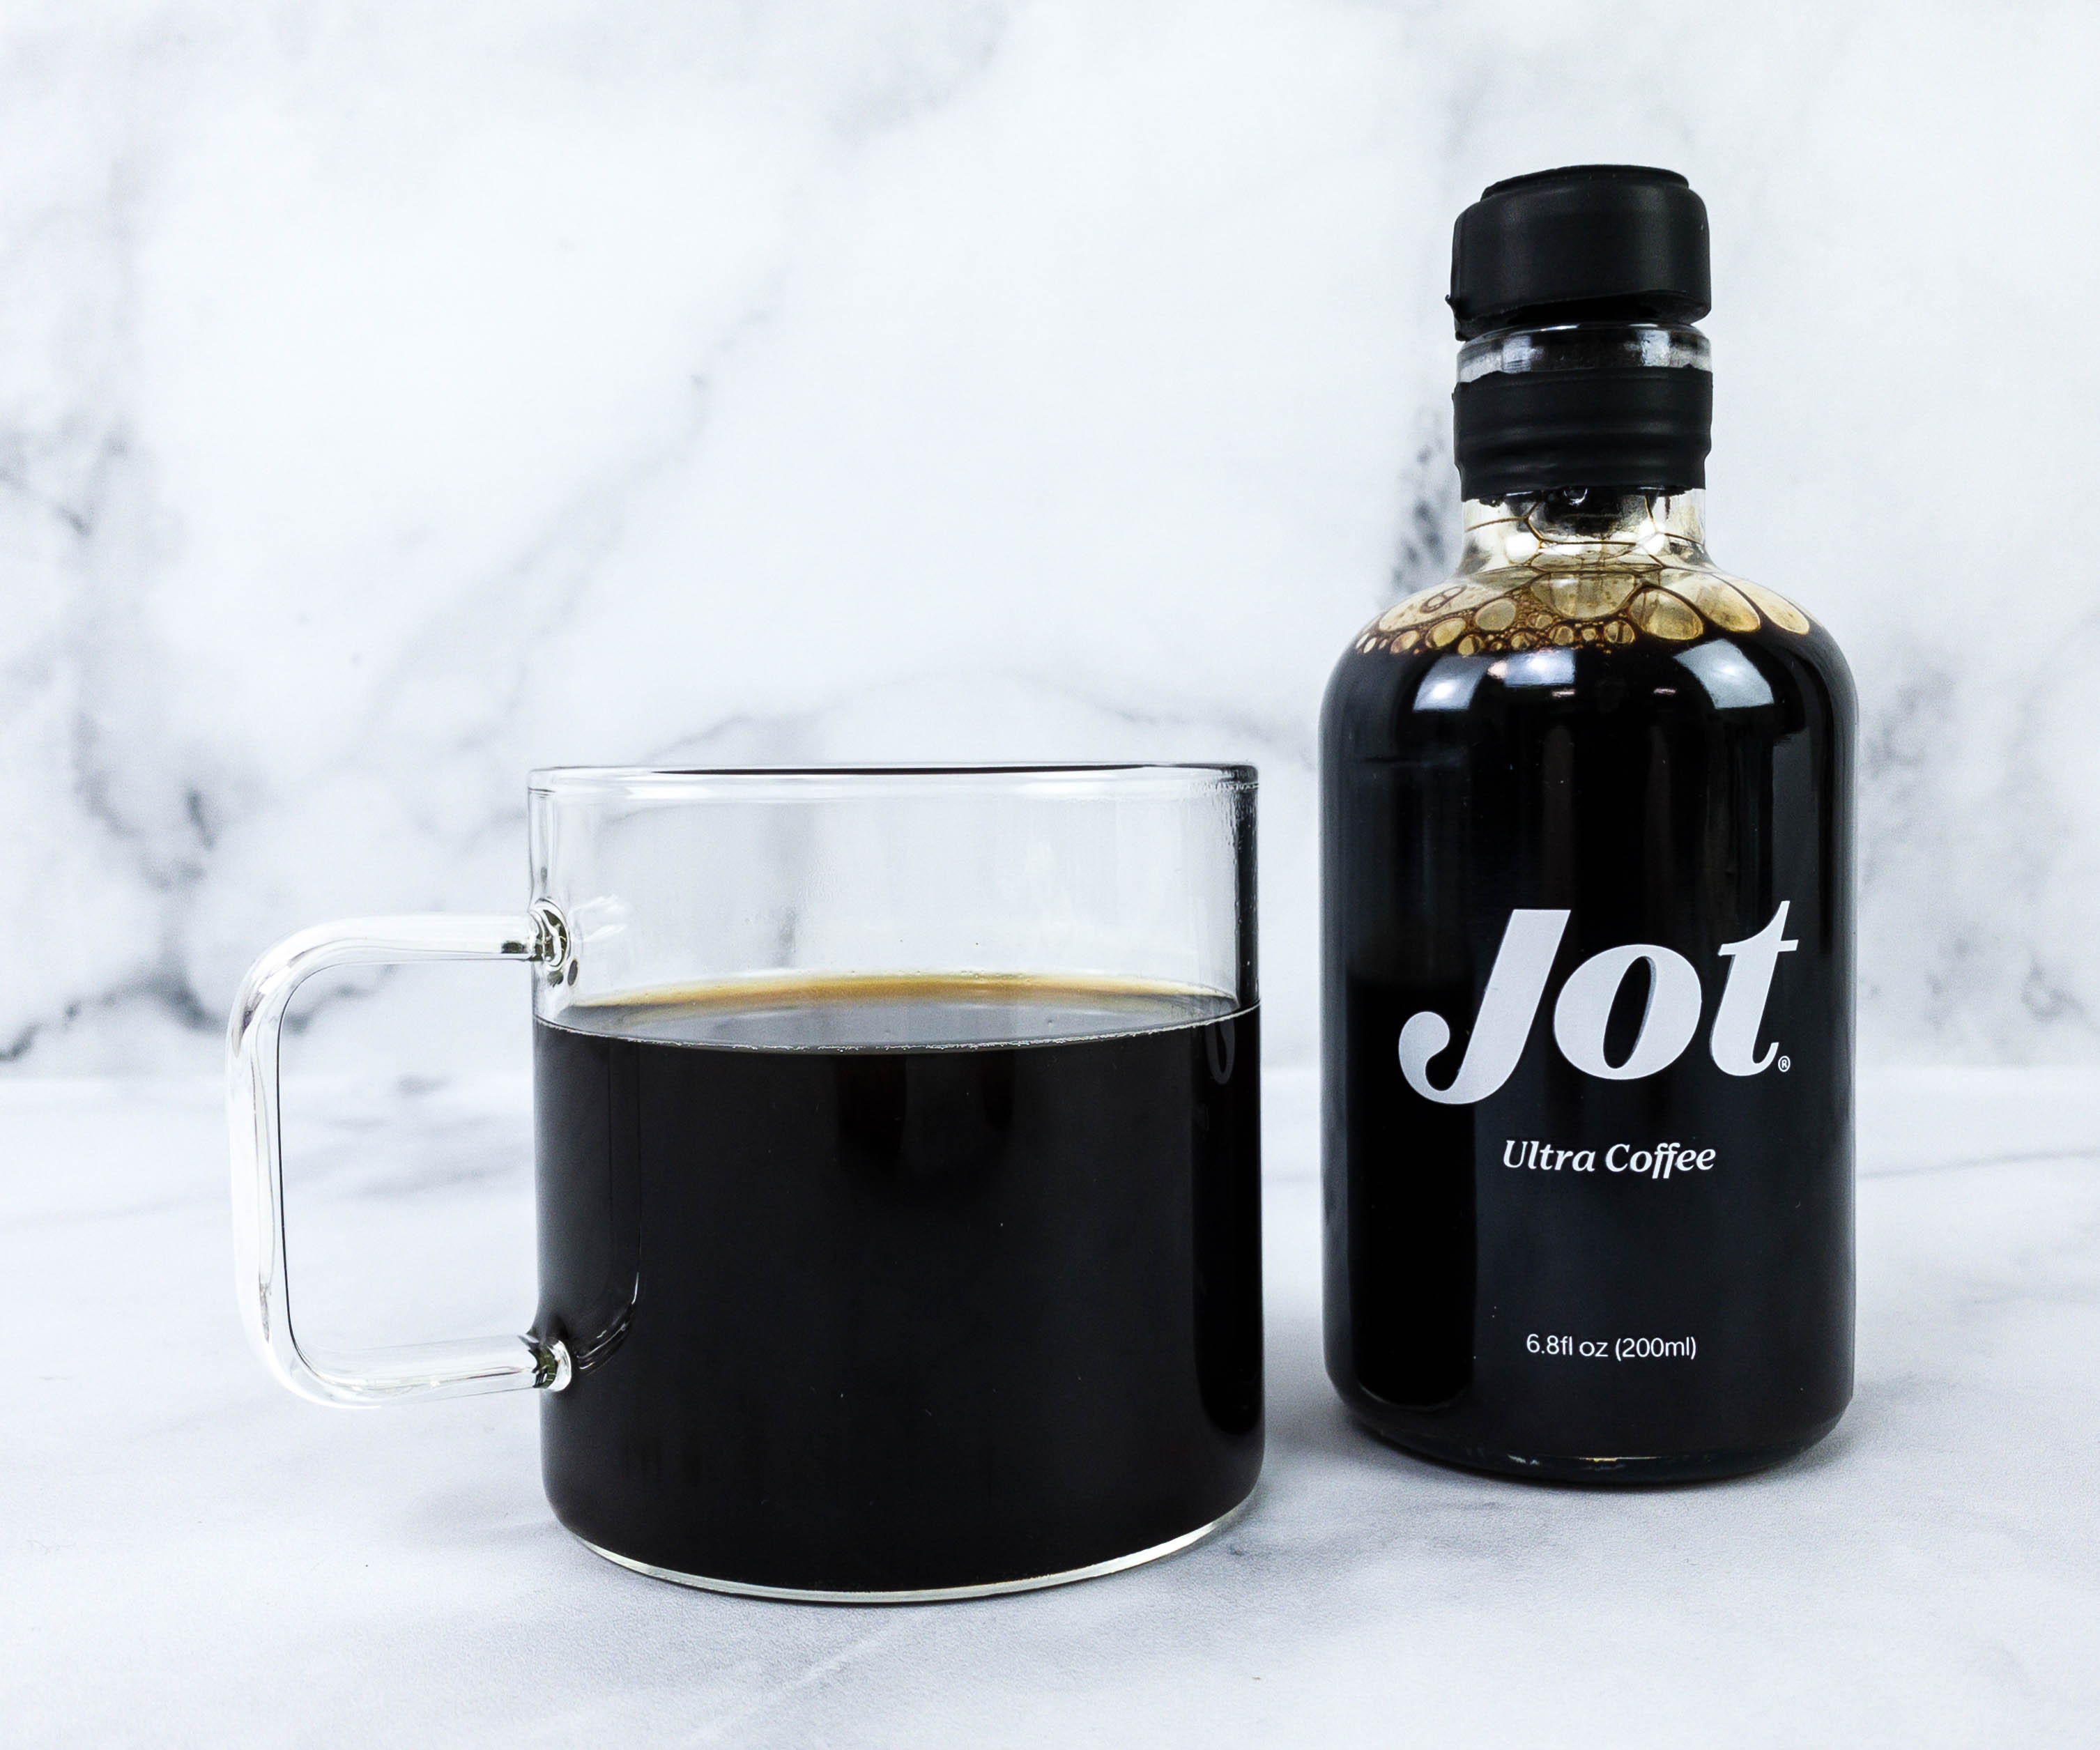 Jot Ultra Coffee Review: A Super Charged Boost of Caffeine